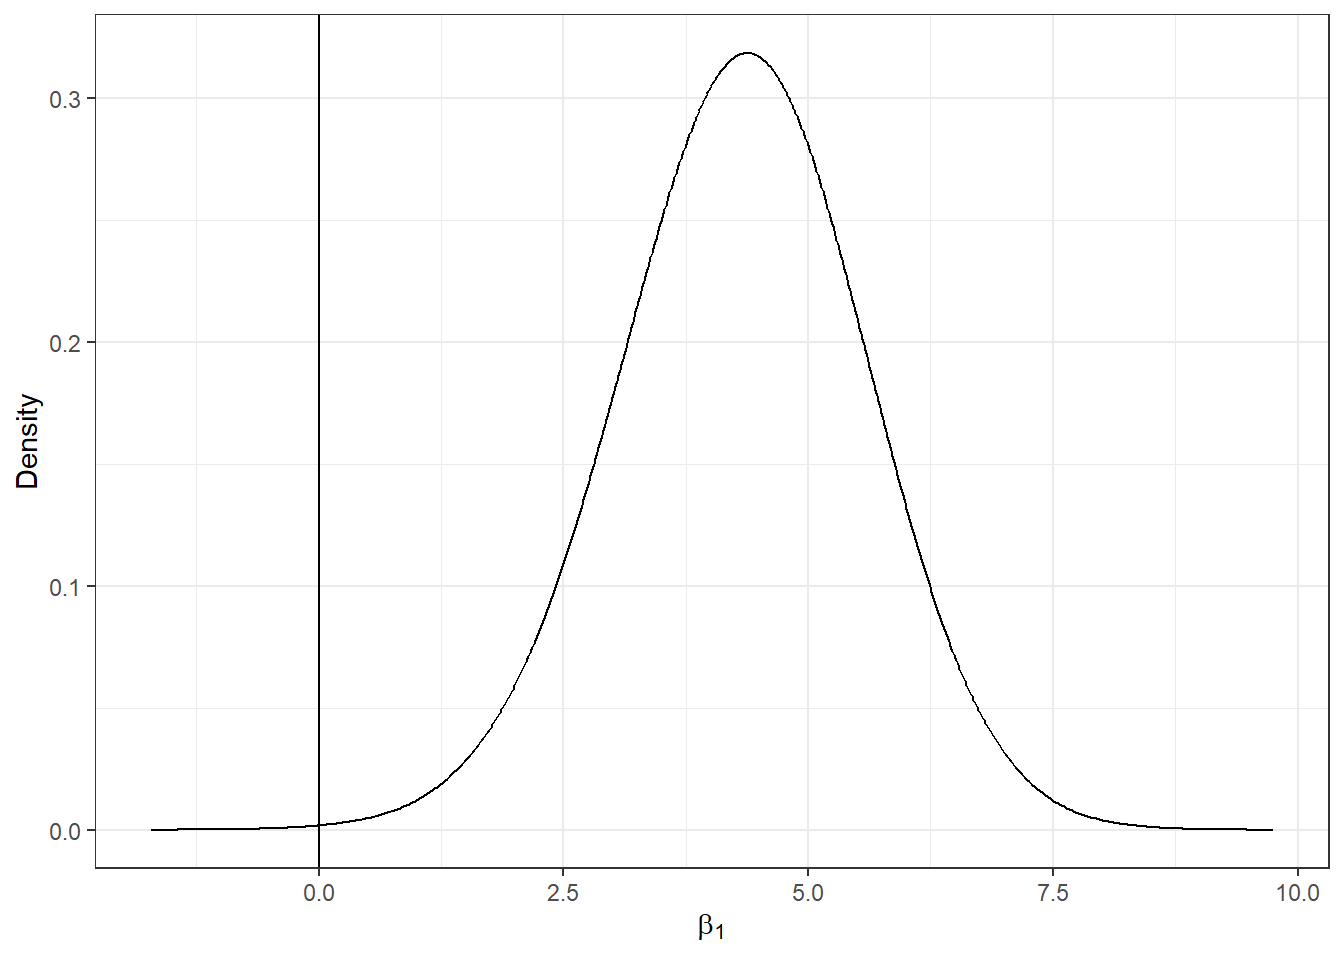 Posterior distribution of the coefficient of covariate AFF.